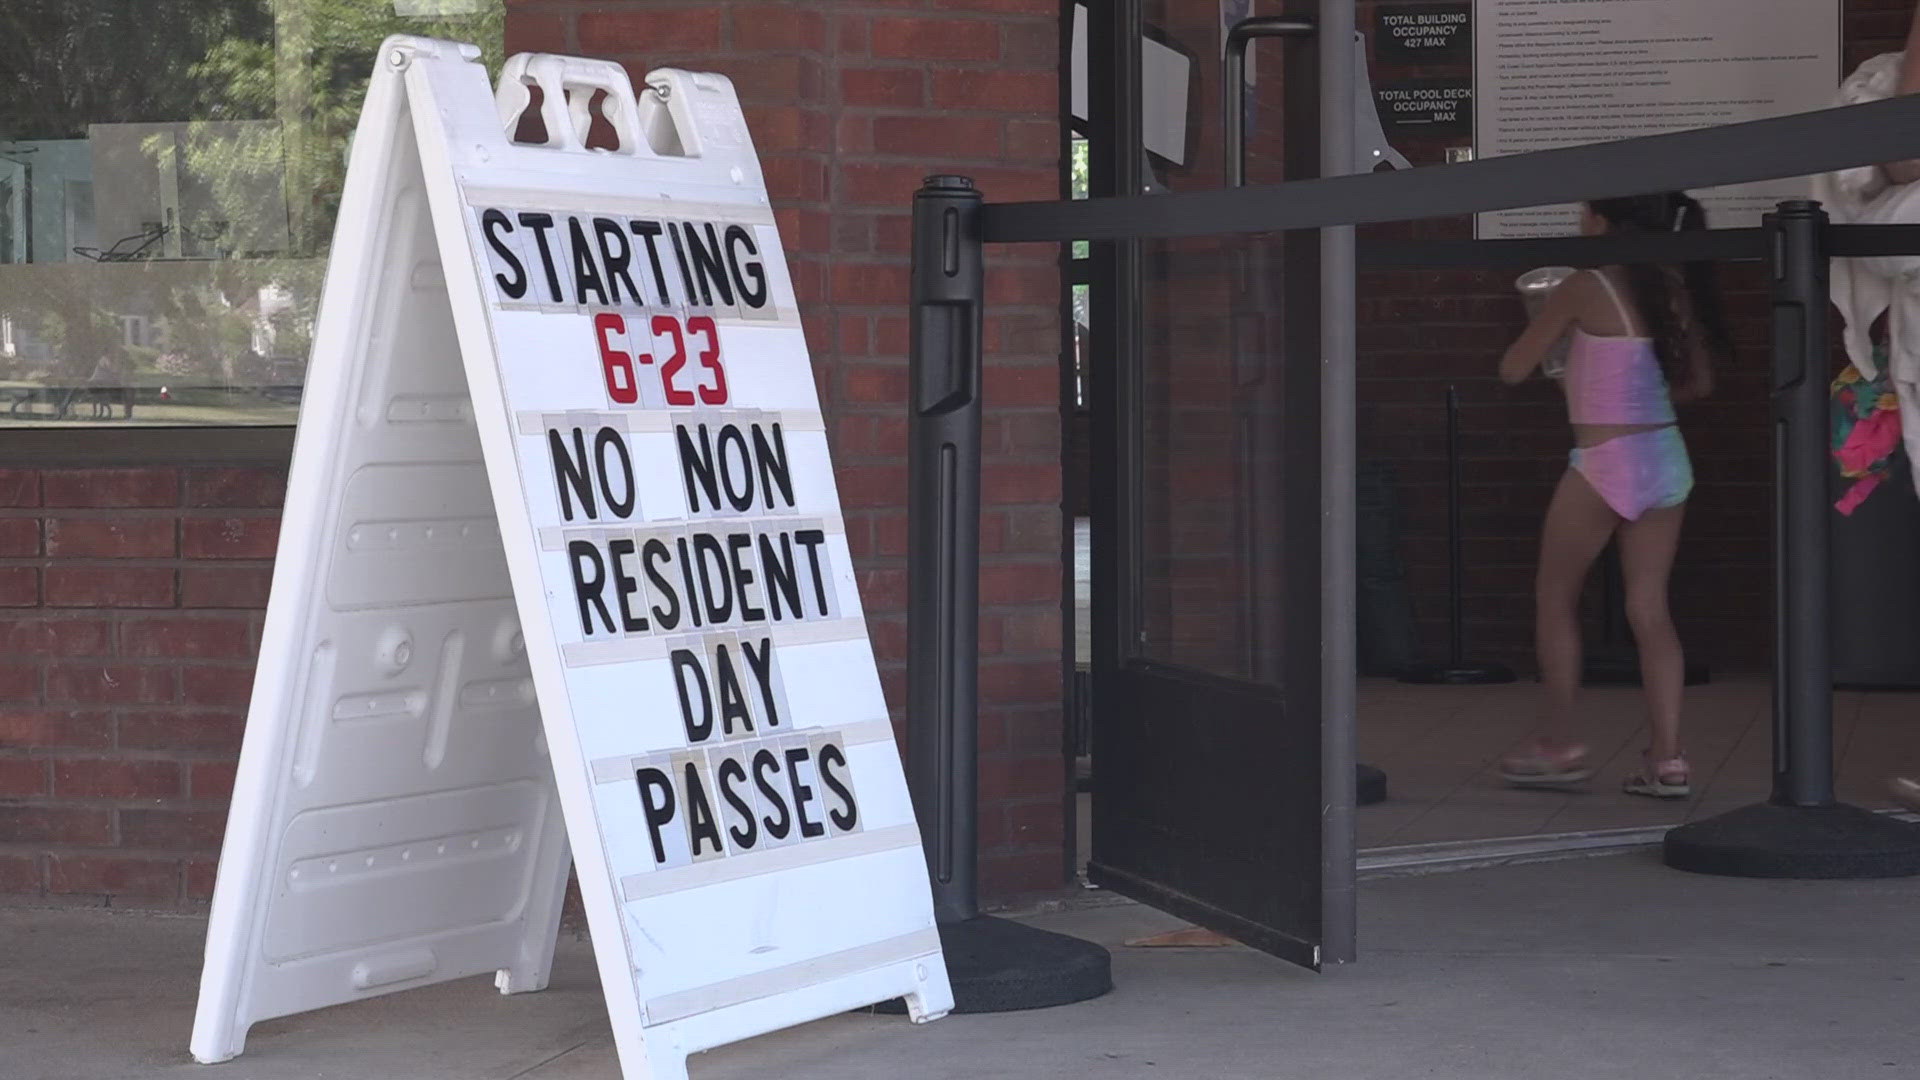 'Each non-resident must be accompanied by a Lakewood resident on a one-to-one basis.' Lakewood residents who want a day pass to swim must bring proof of residency.